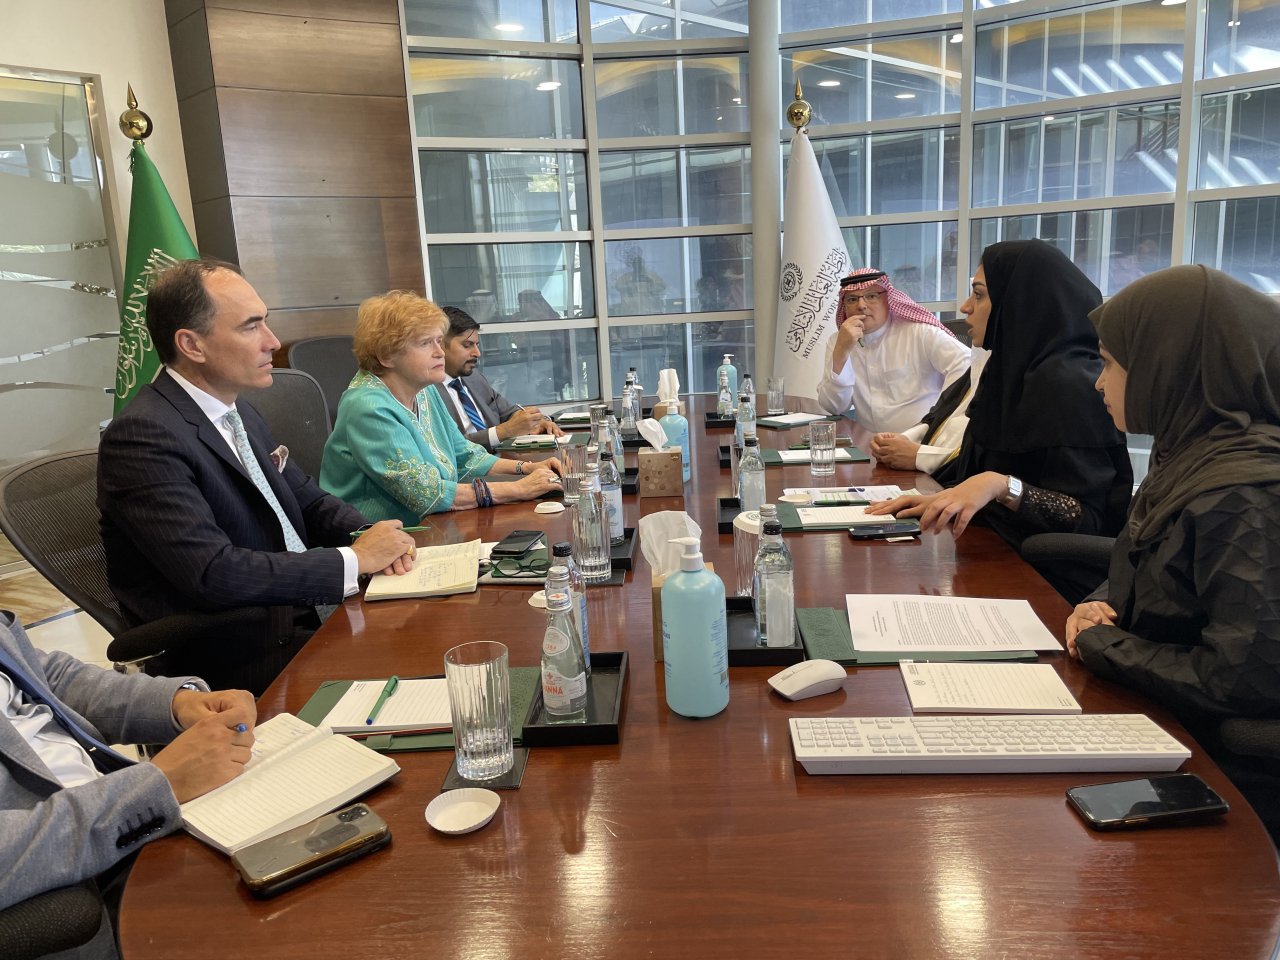 The US StateDept Envoy to Monitor and Combat Antisemitism Deborah Lipstadt State SEAS met at the Muslim World League's office in Riyadh